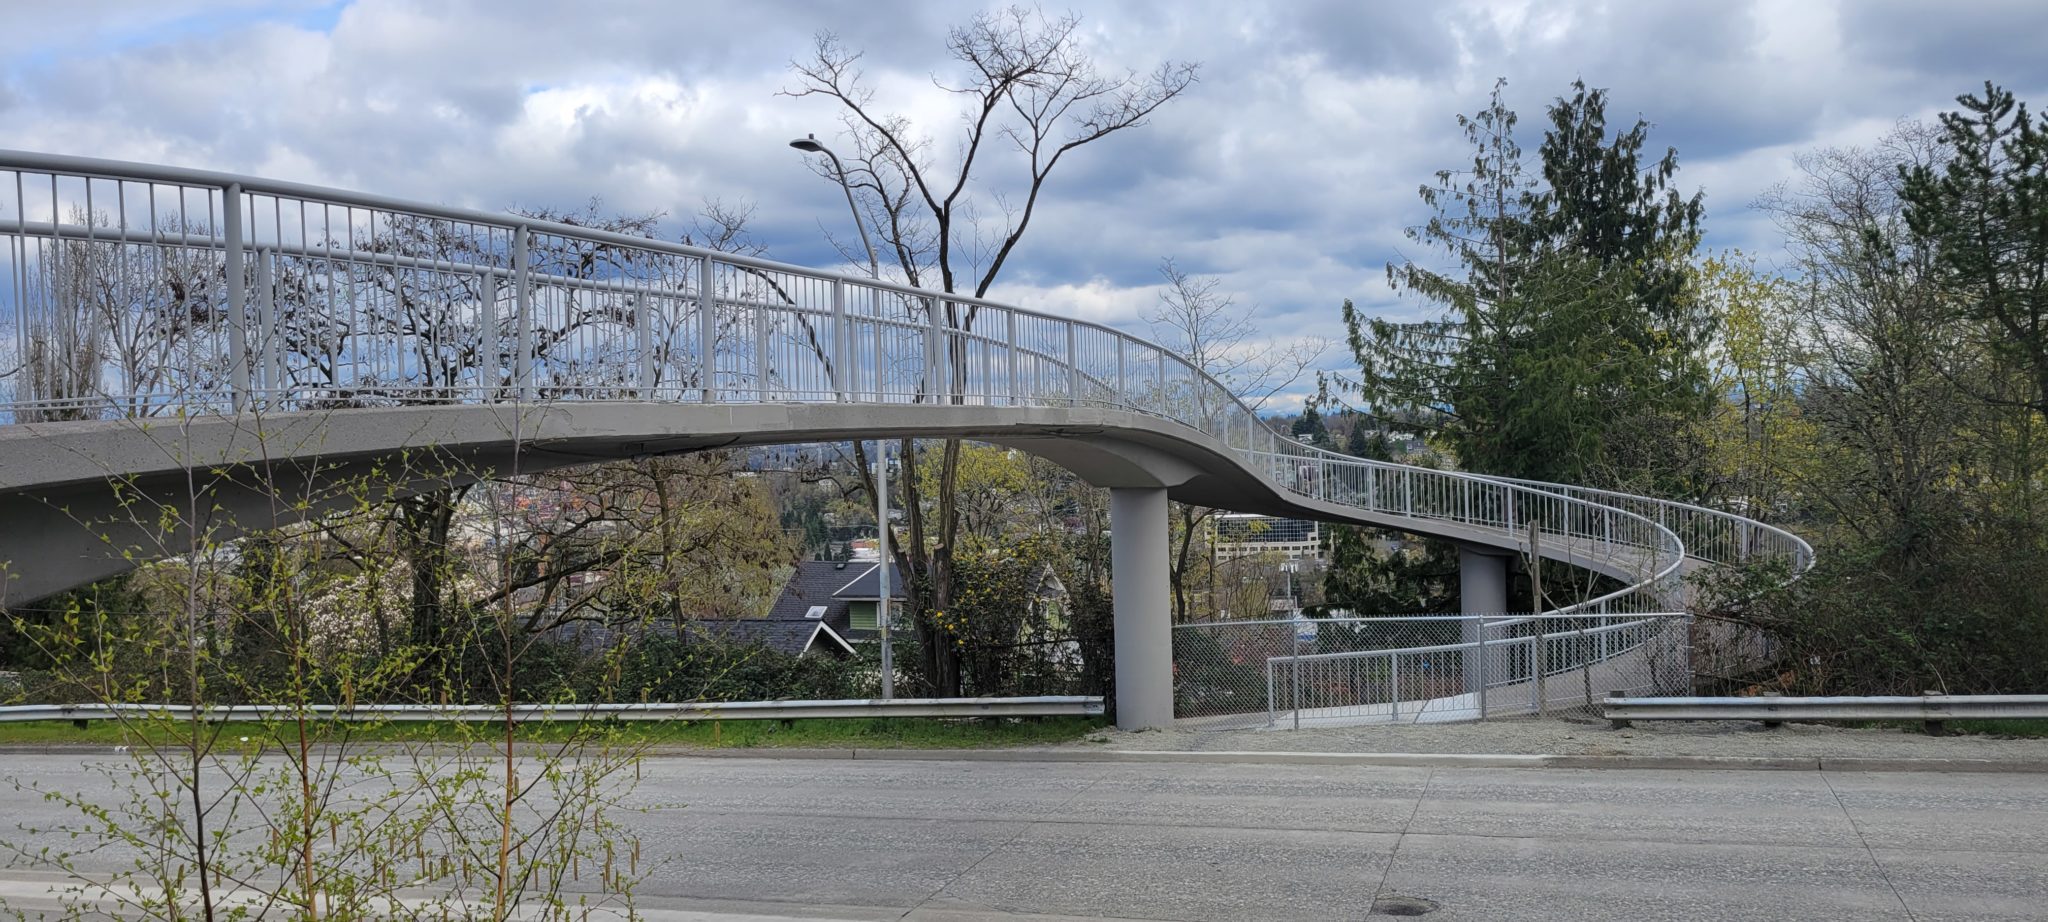 The SW Andover St Pedestrian and Bicycle Bridge.